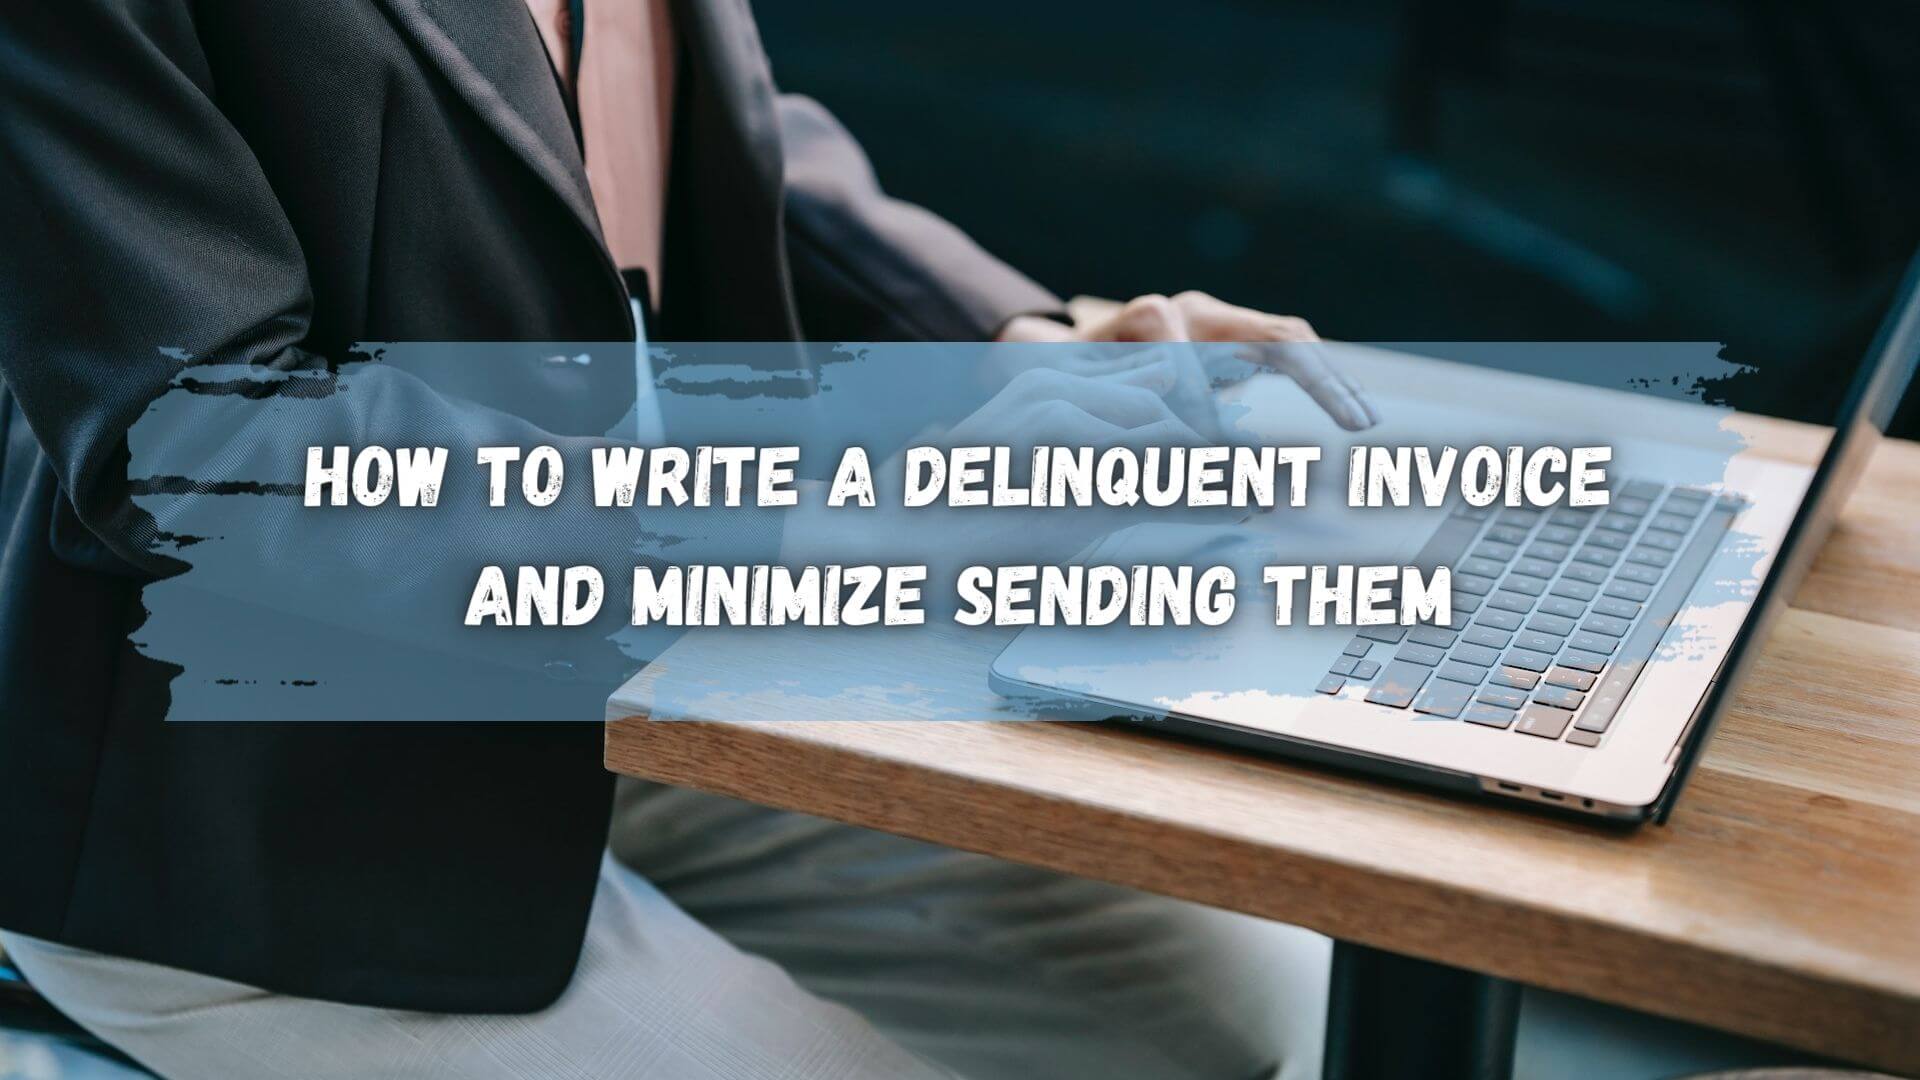 A Delinquent Invoice Email, is a reminder sent to a customer who has not paid their invoice by the due date. Here's how to write one!